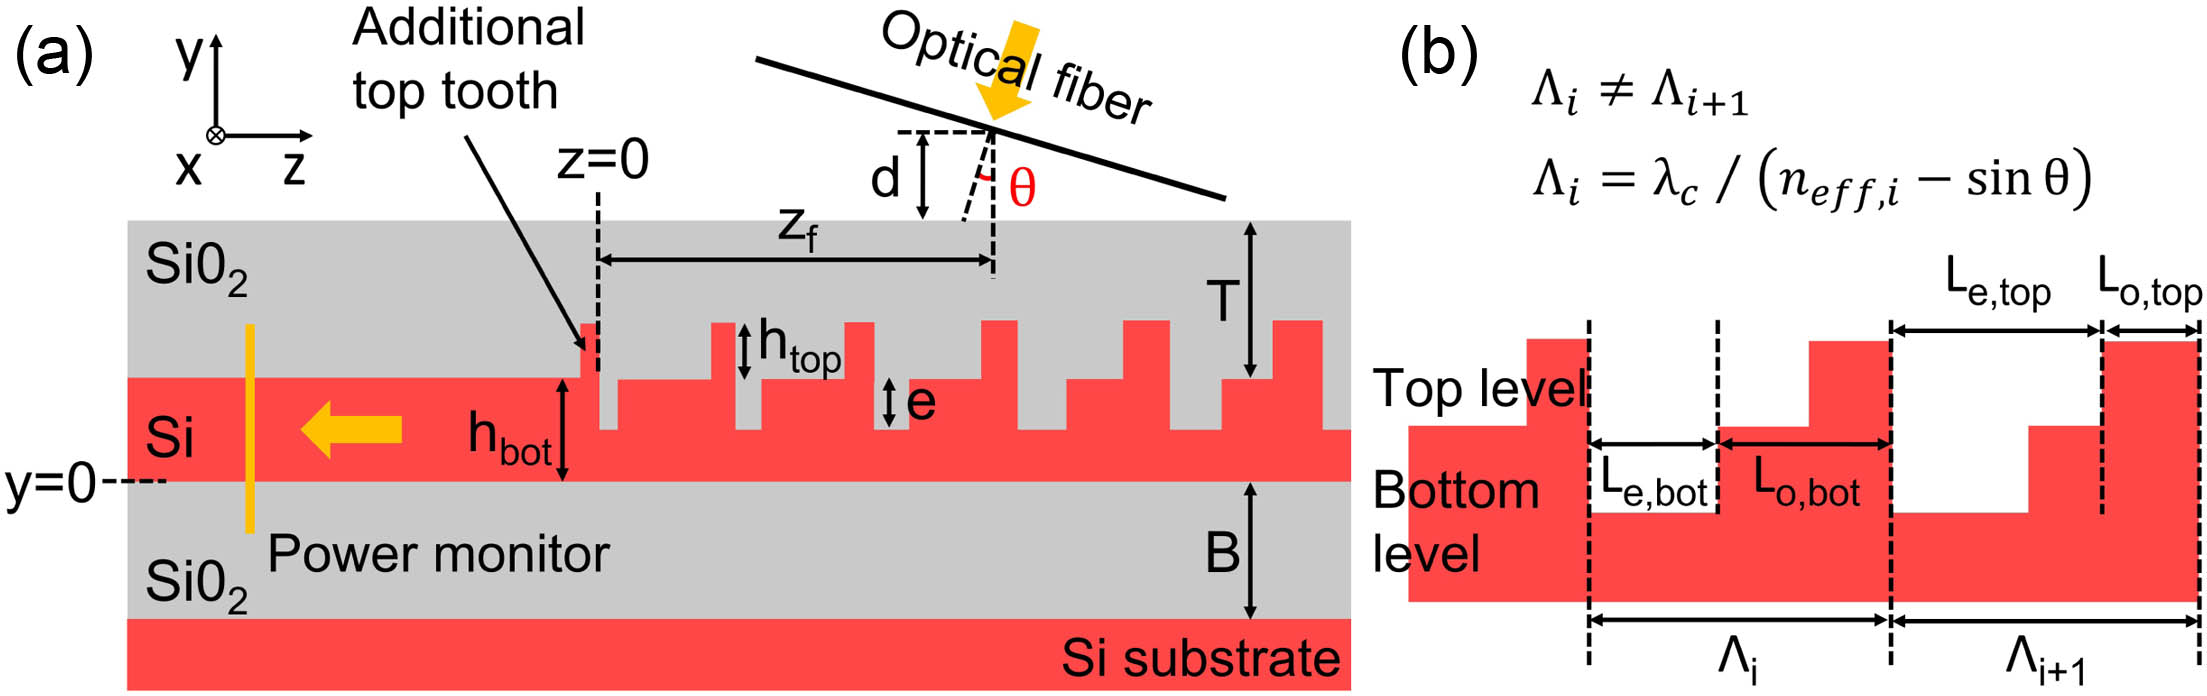 (a) 2D schematic view and simulation layout of the proposed dual-level Si GC; (b) cross-sectional schematic with the parameter names used to indicate the GC dimensions.